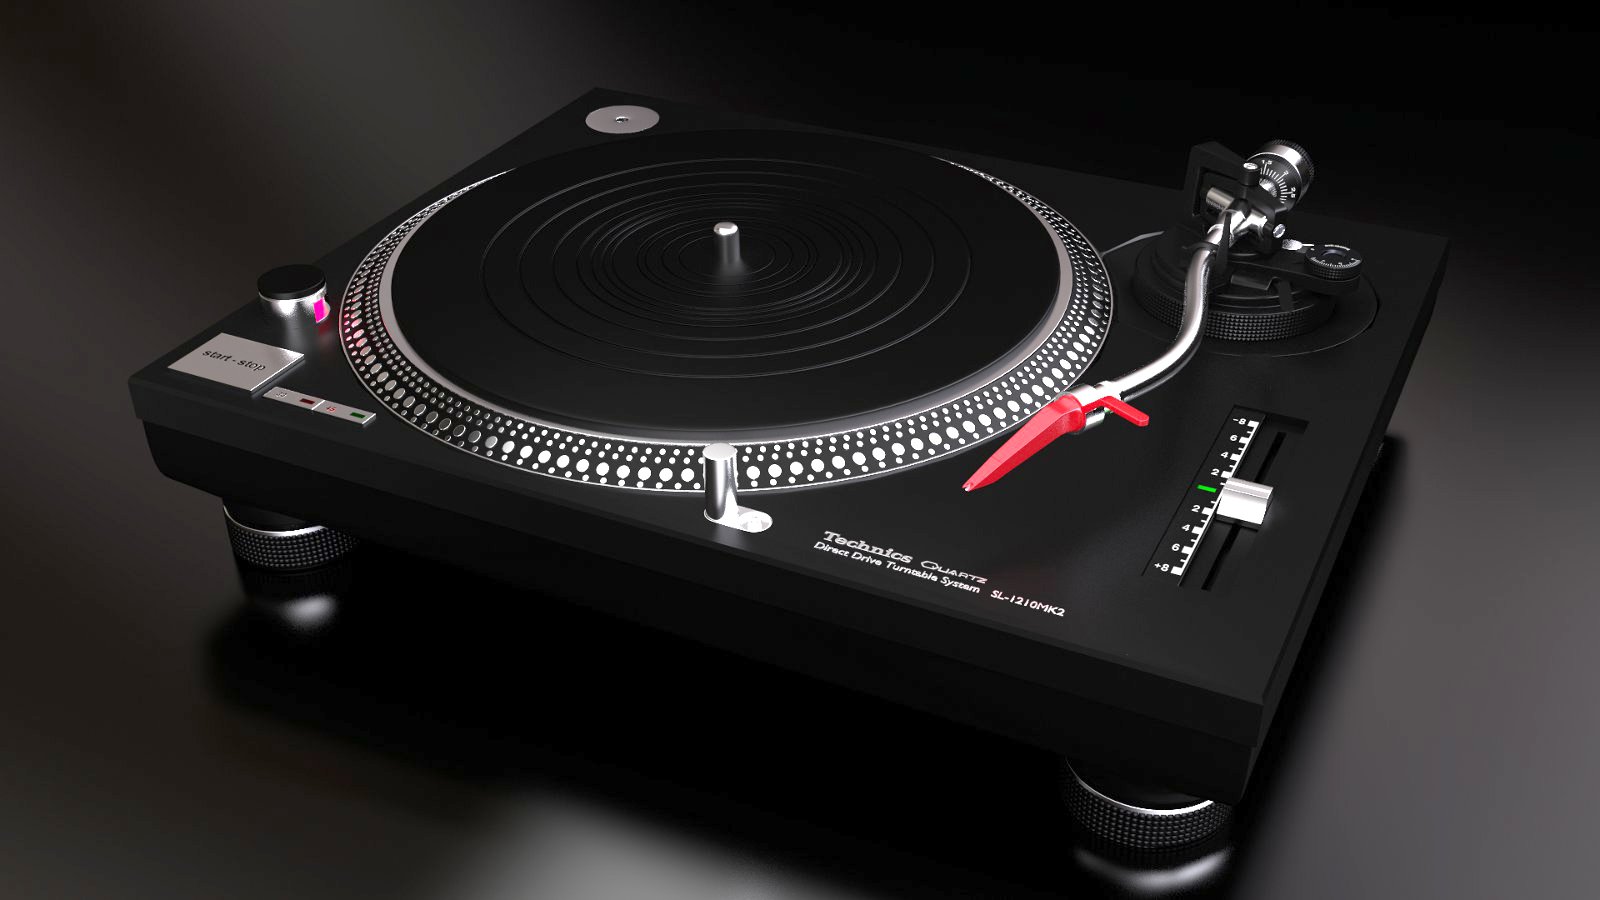 Best Of Technics Wallpapers Hd For Android - Toca Disco Technics Mk2 , HD Wallpaper & Backgrounds